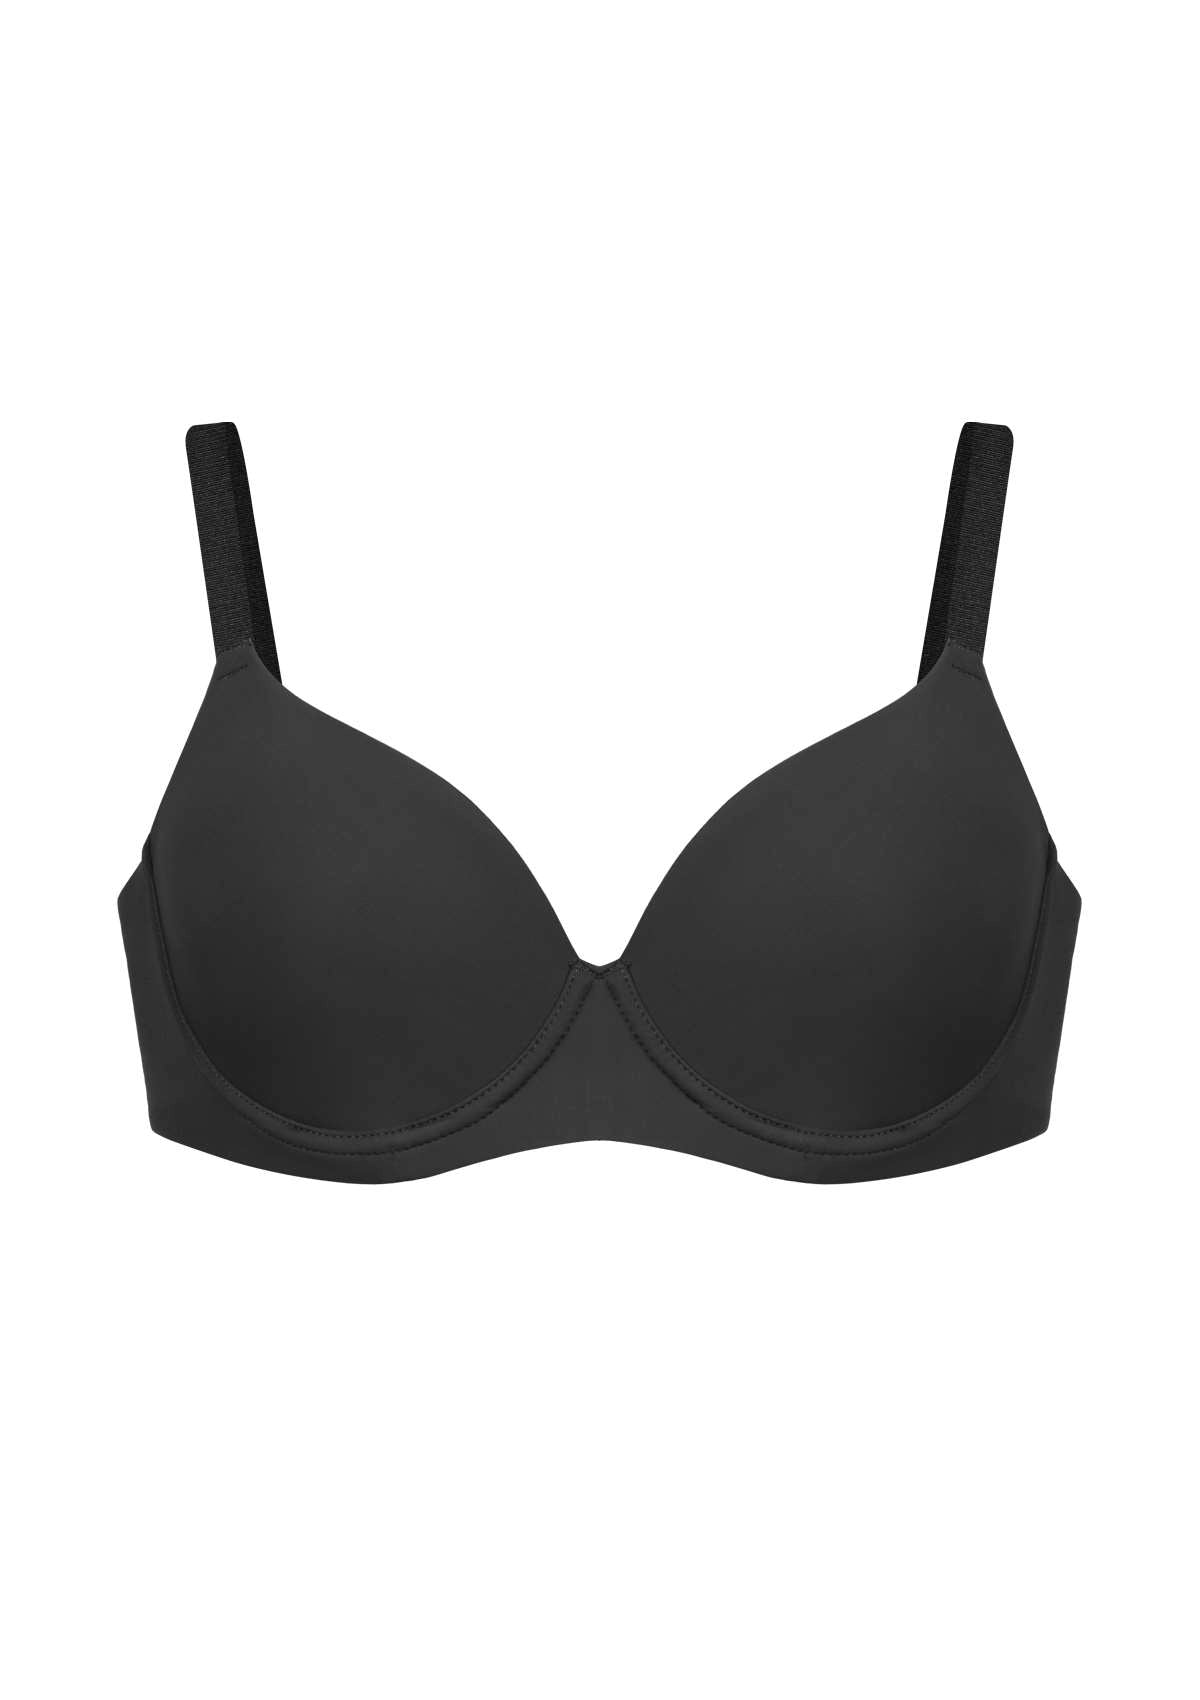 HSIA Gemma Smooth Padded T-shirt Everyday Bras - For Lift And Comfort - Black / 38 / D